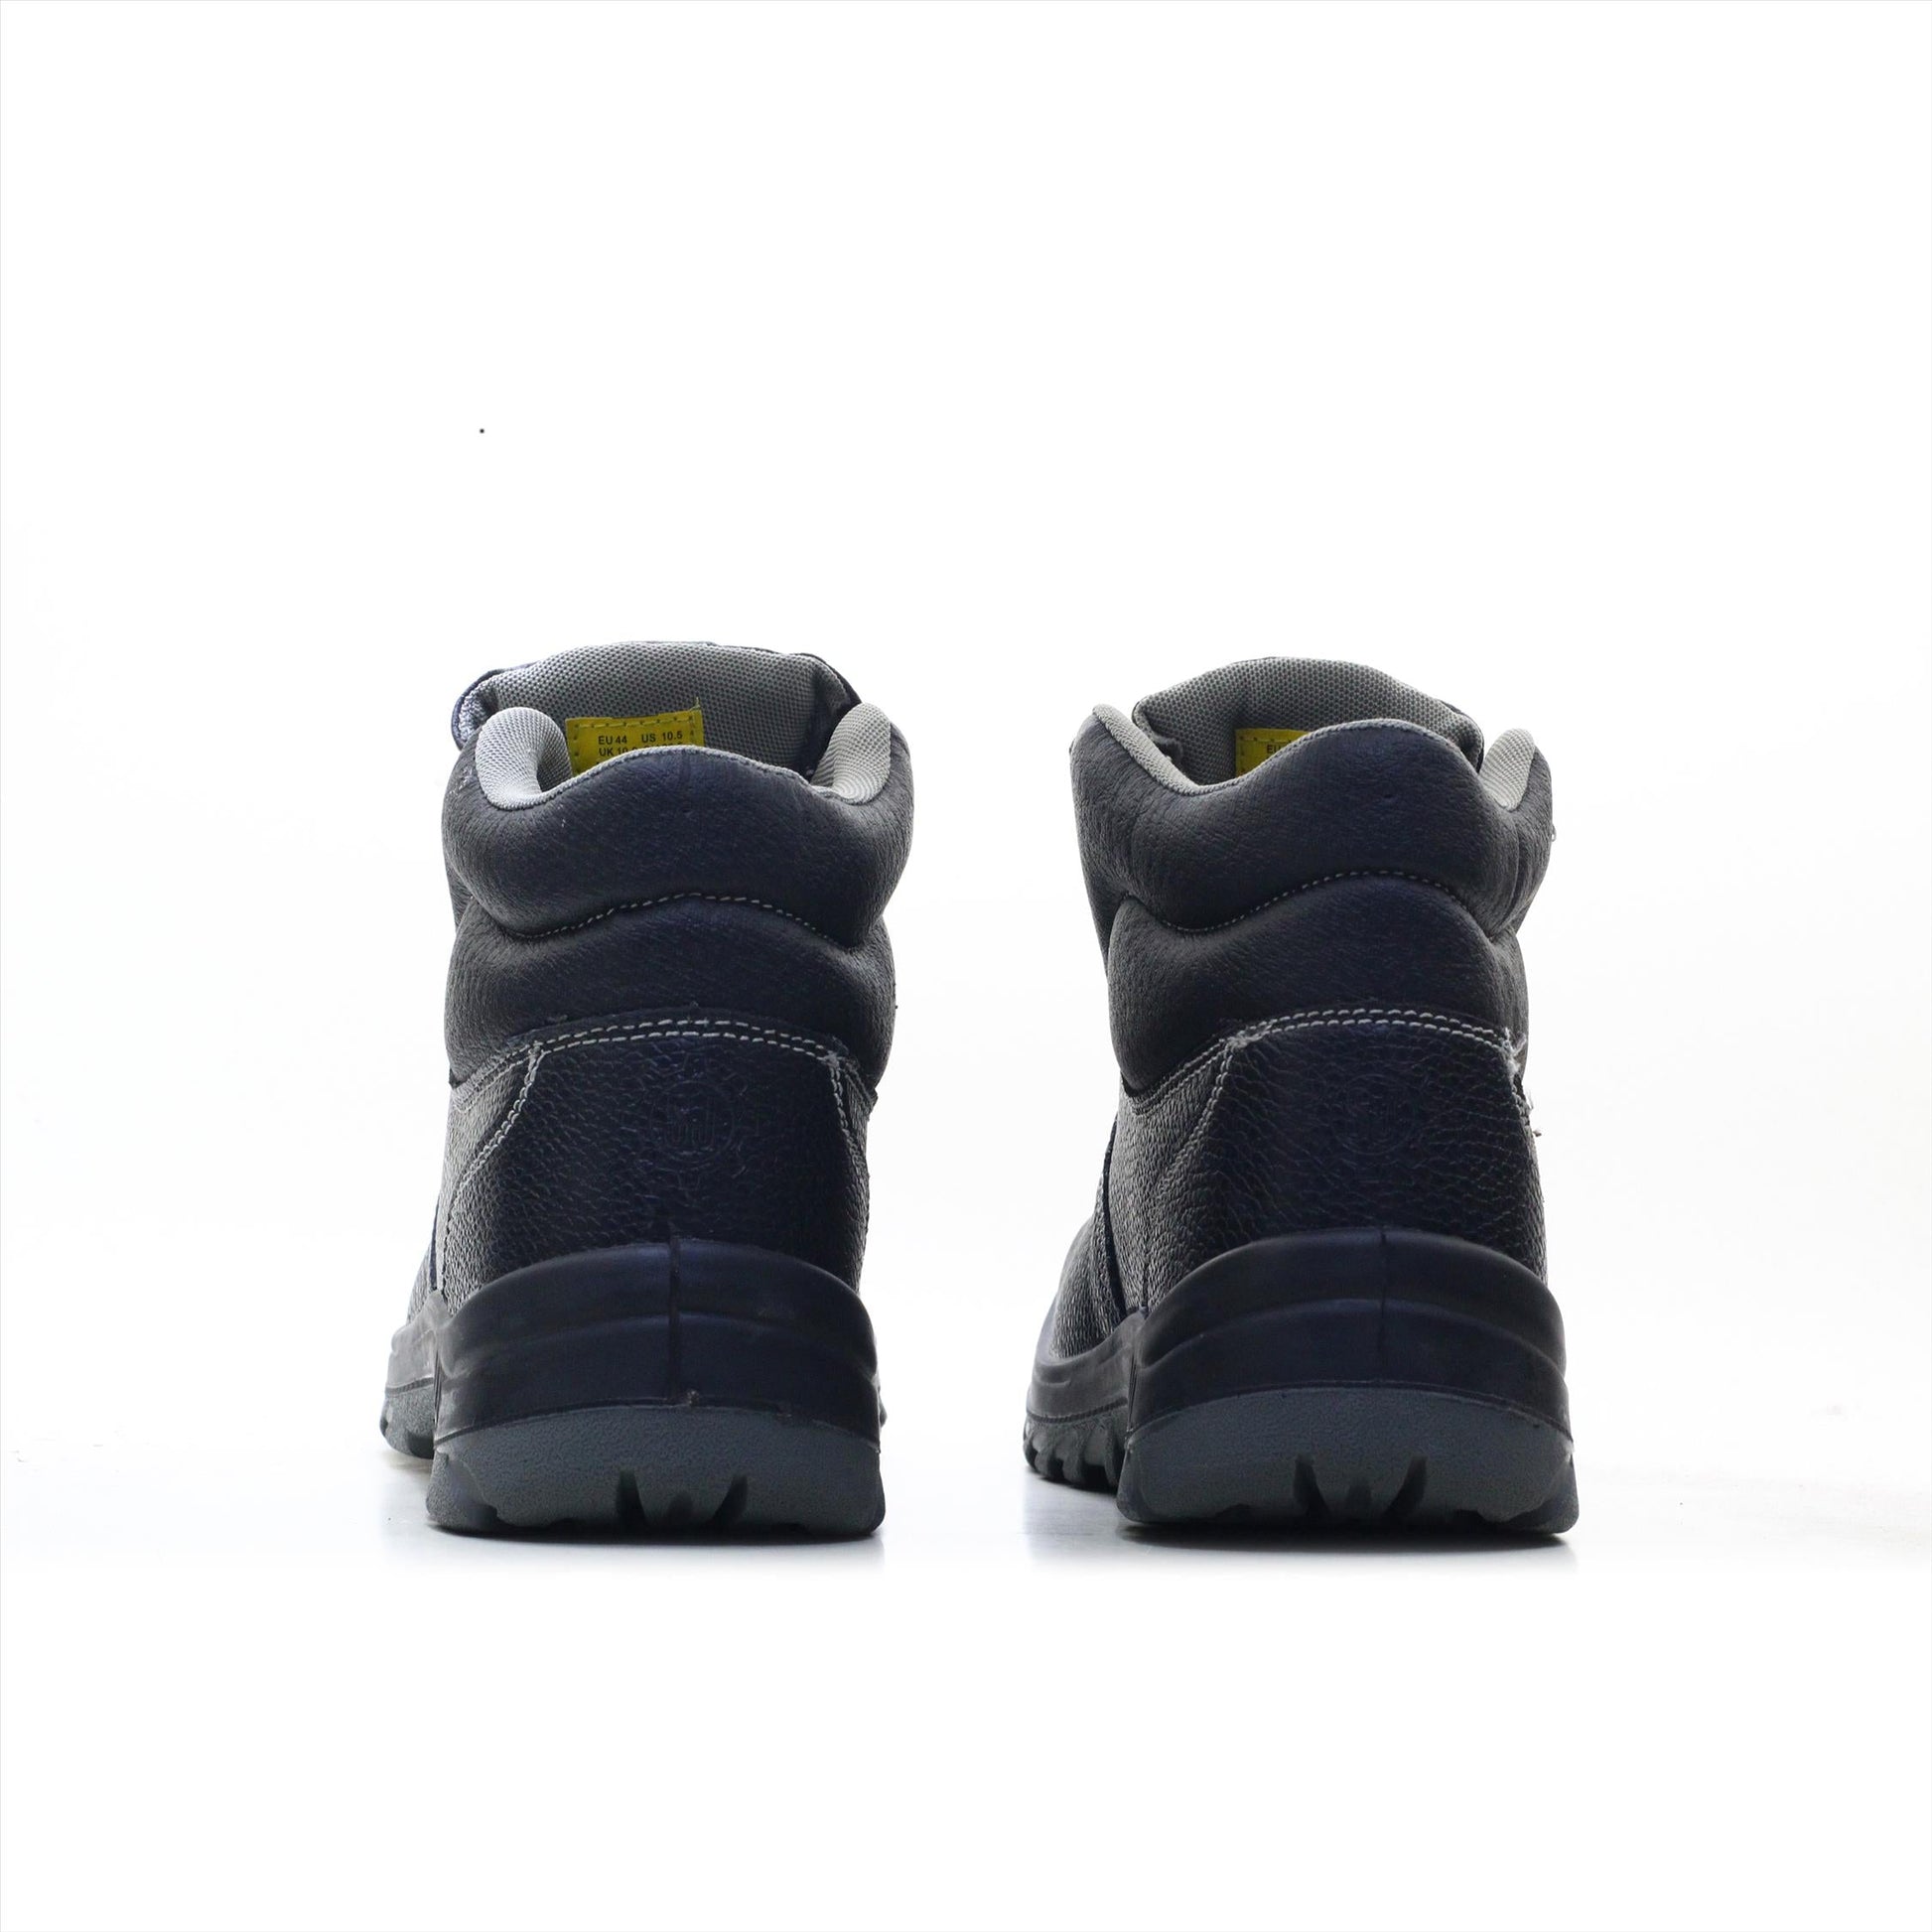 SAFETY JOGGER BESTBOY STEEL TOE (Original USA Imported)